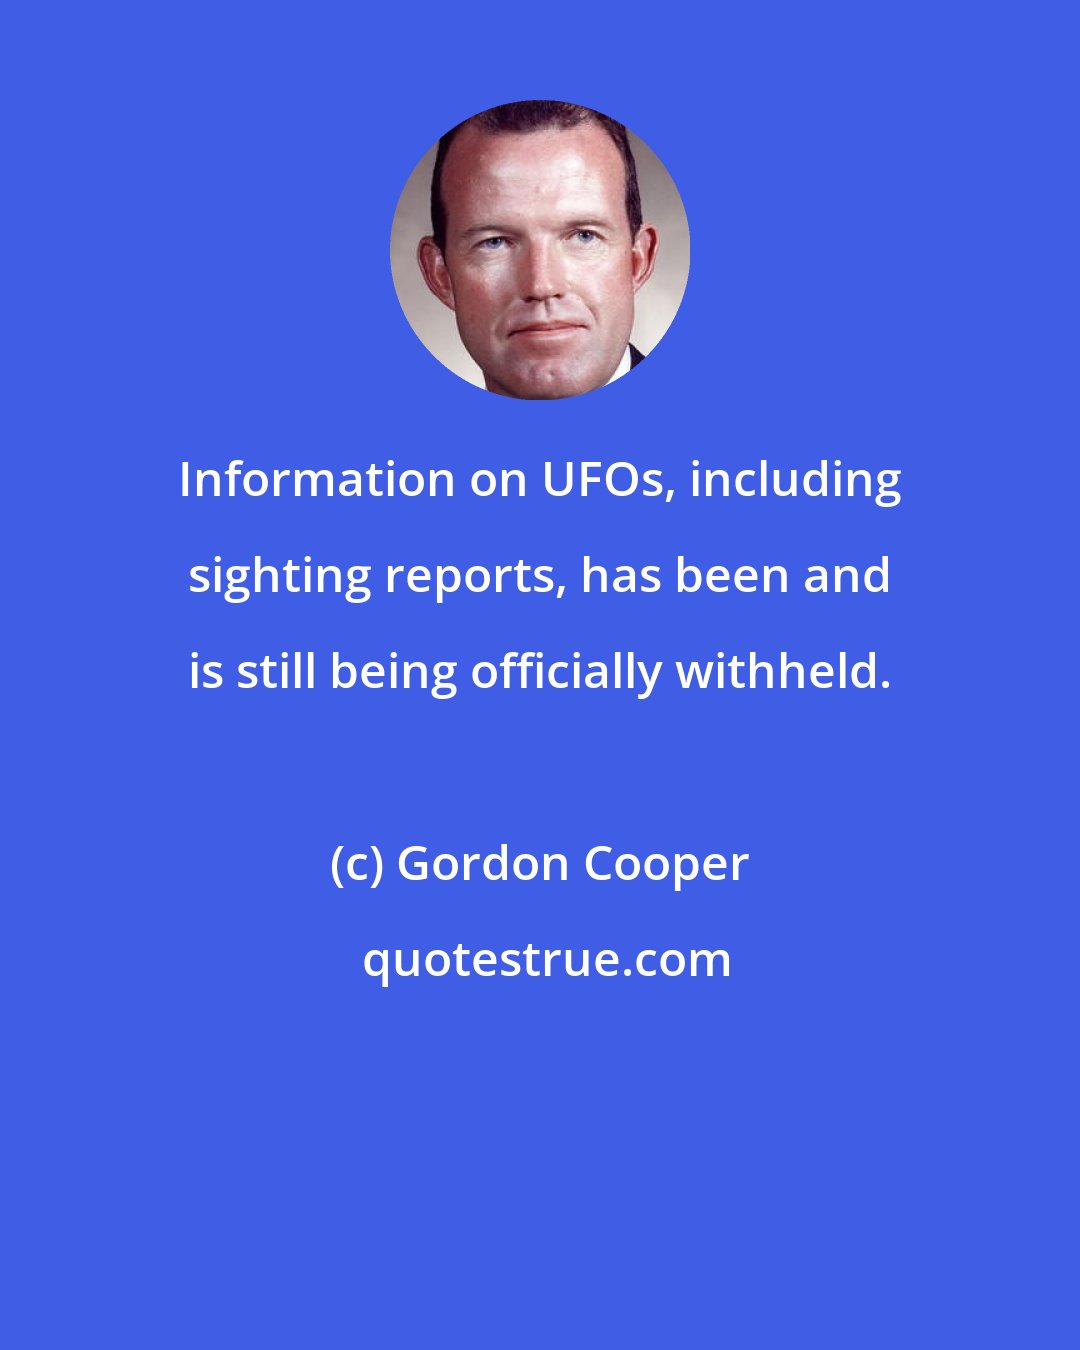 Gordon Cooper: Information on UFOs, including sighting reports, has been and is still being officially withheld.